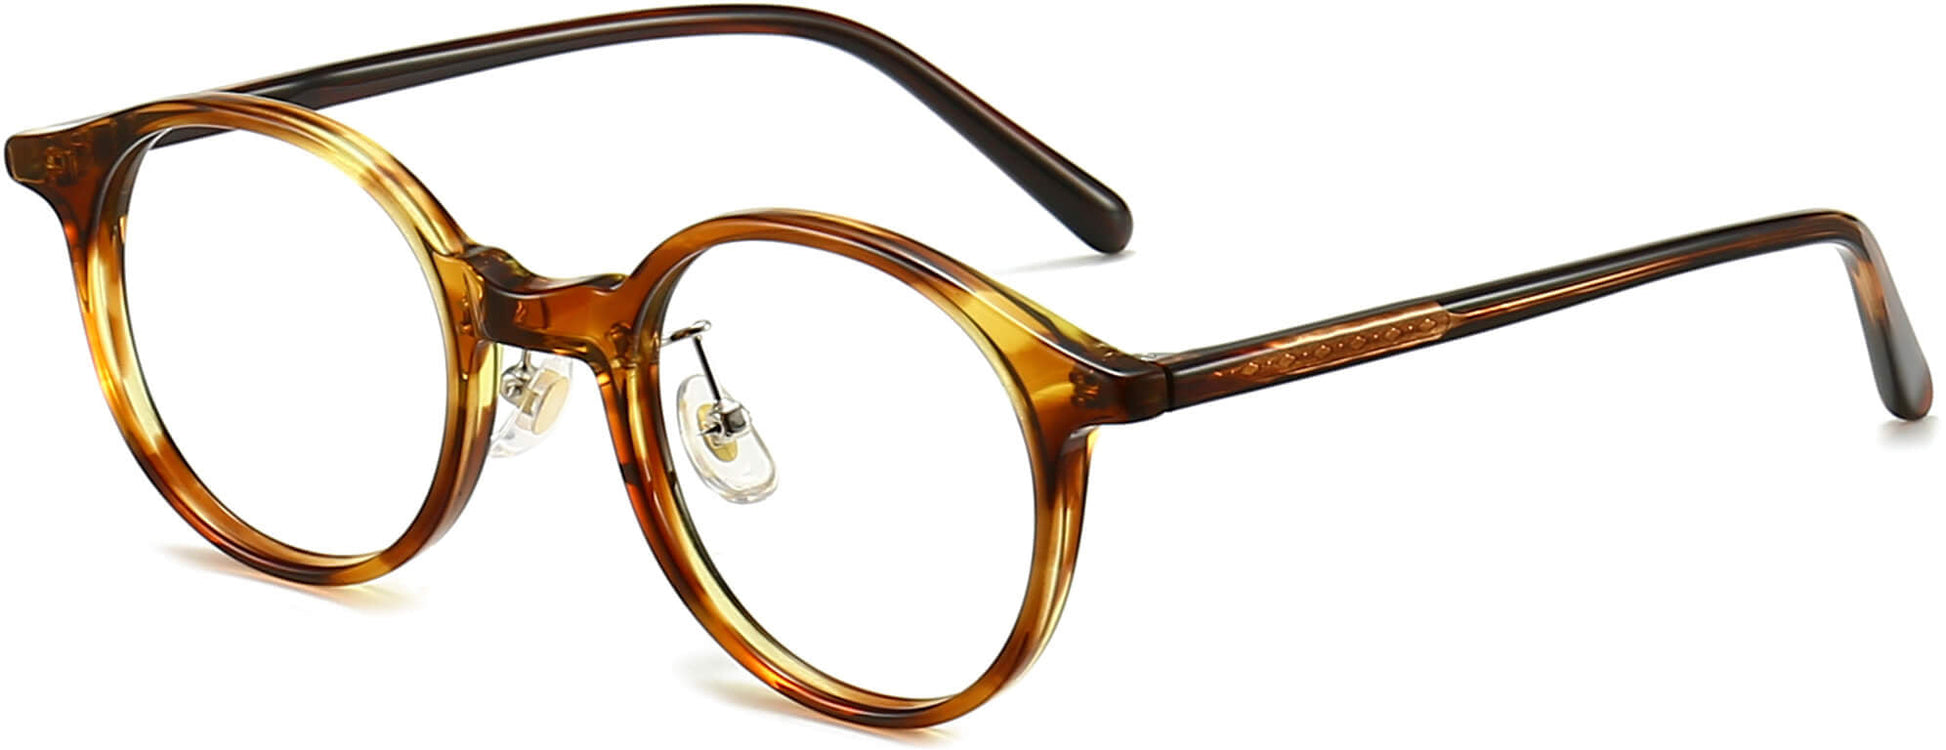 Liberty Round Tortoise Eyeglasses from ANRRI, angle view